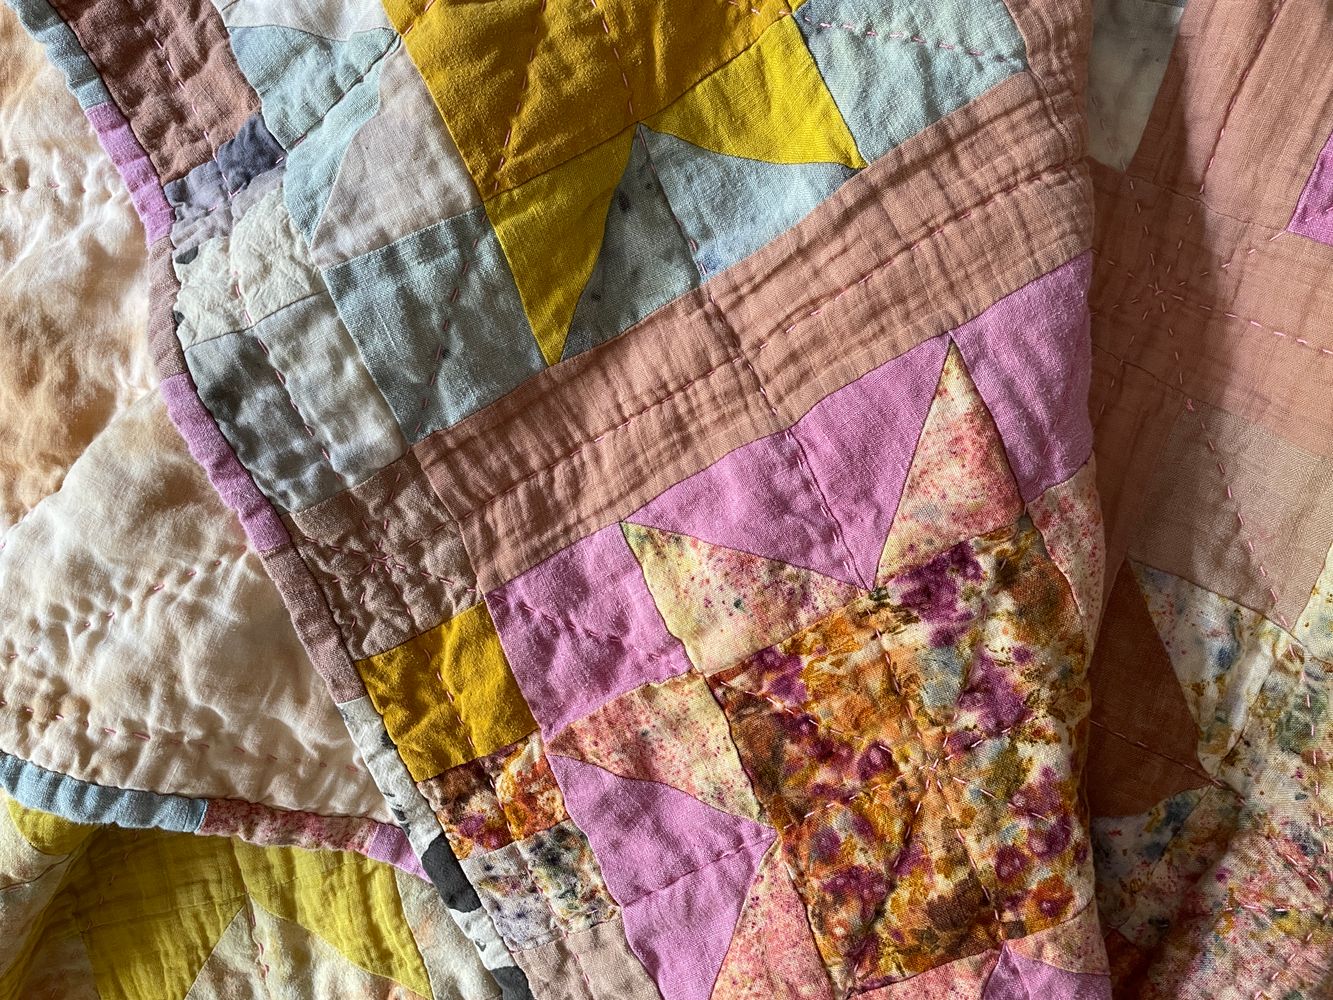 Sawtooth star quilt w/ natural dyes